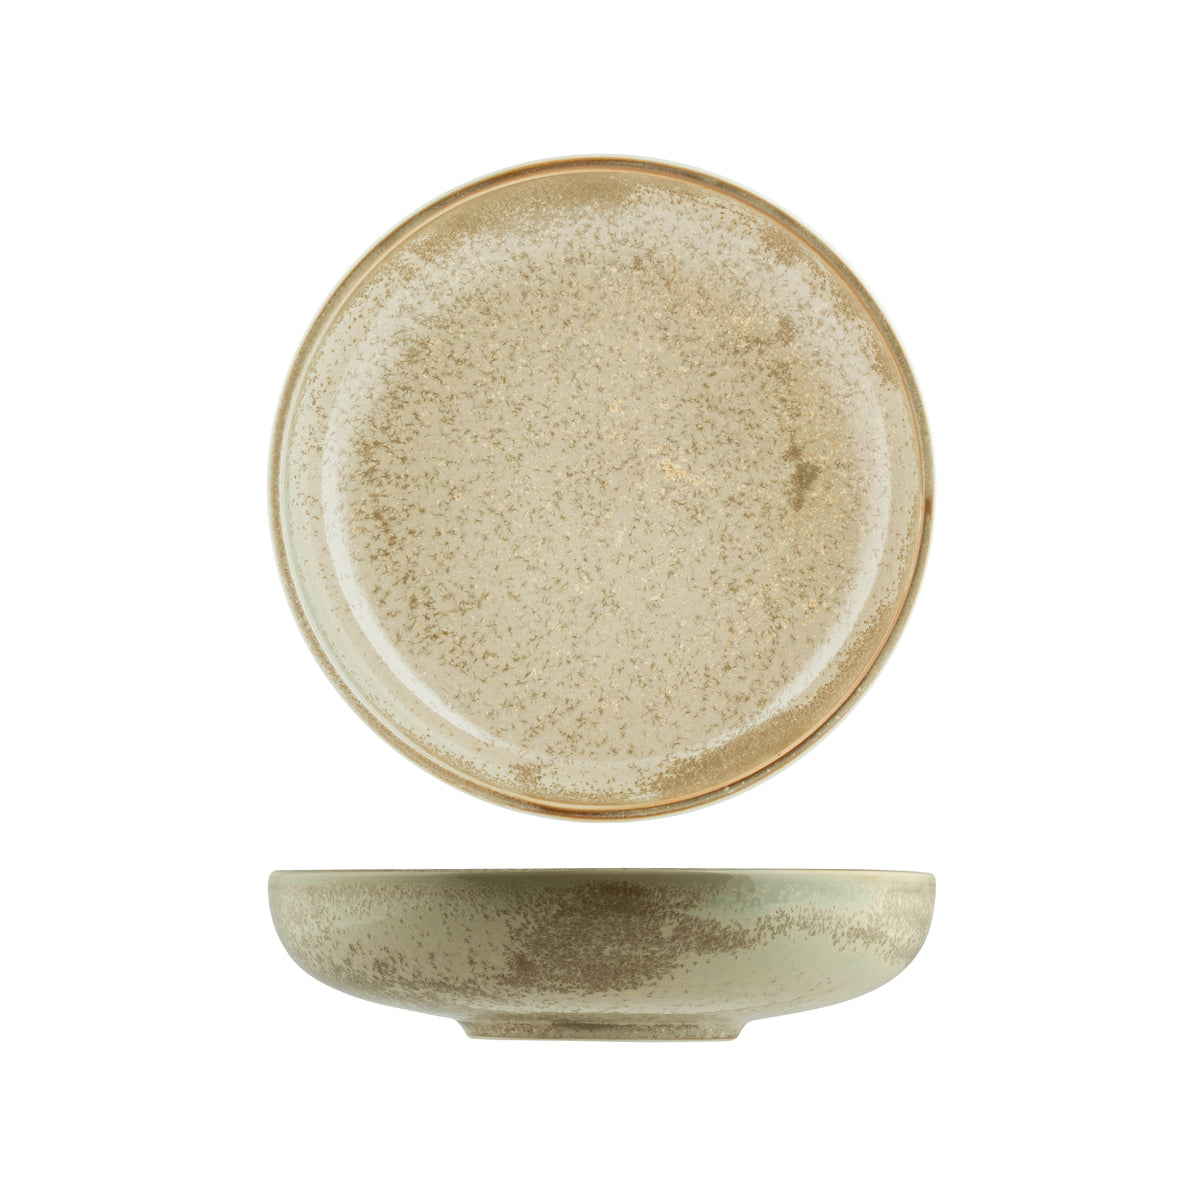 Round Bowl - 215mm, Chic, Earthy from Moda Porcelain. made out of Porcelain and sold in boxes of 4. Hospitality quality at wholesale price with The Flying Fork! 